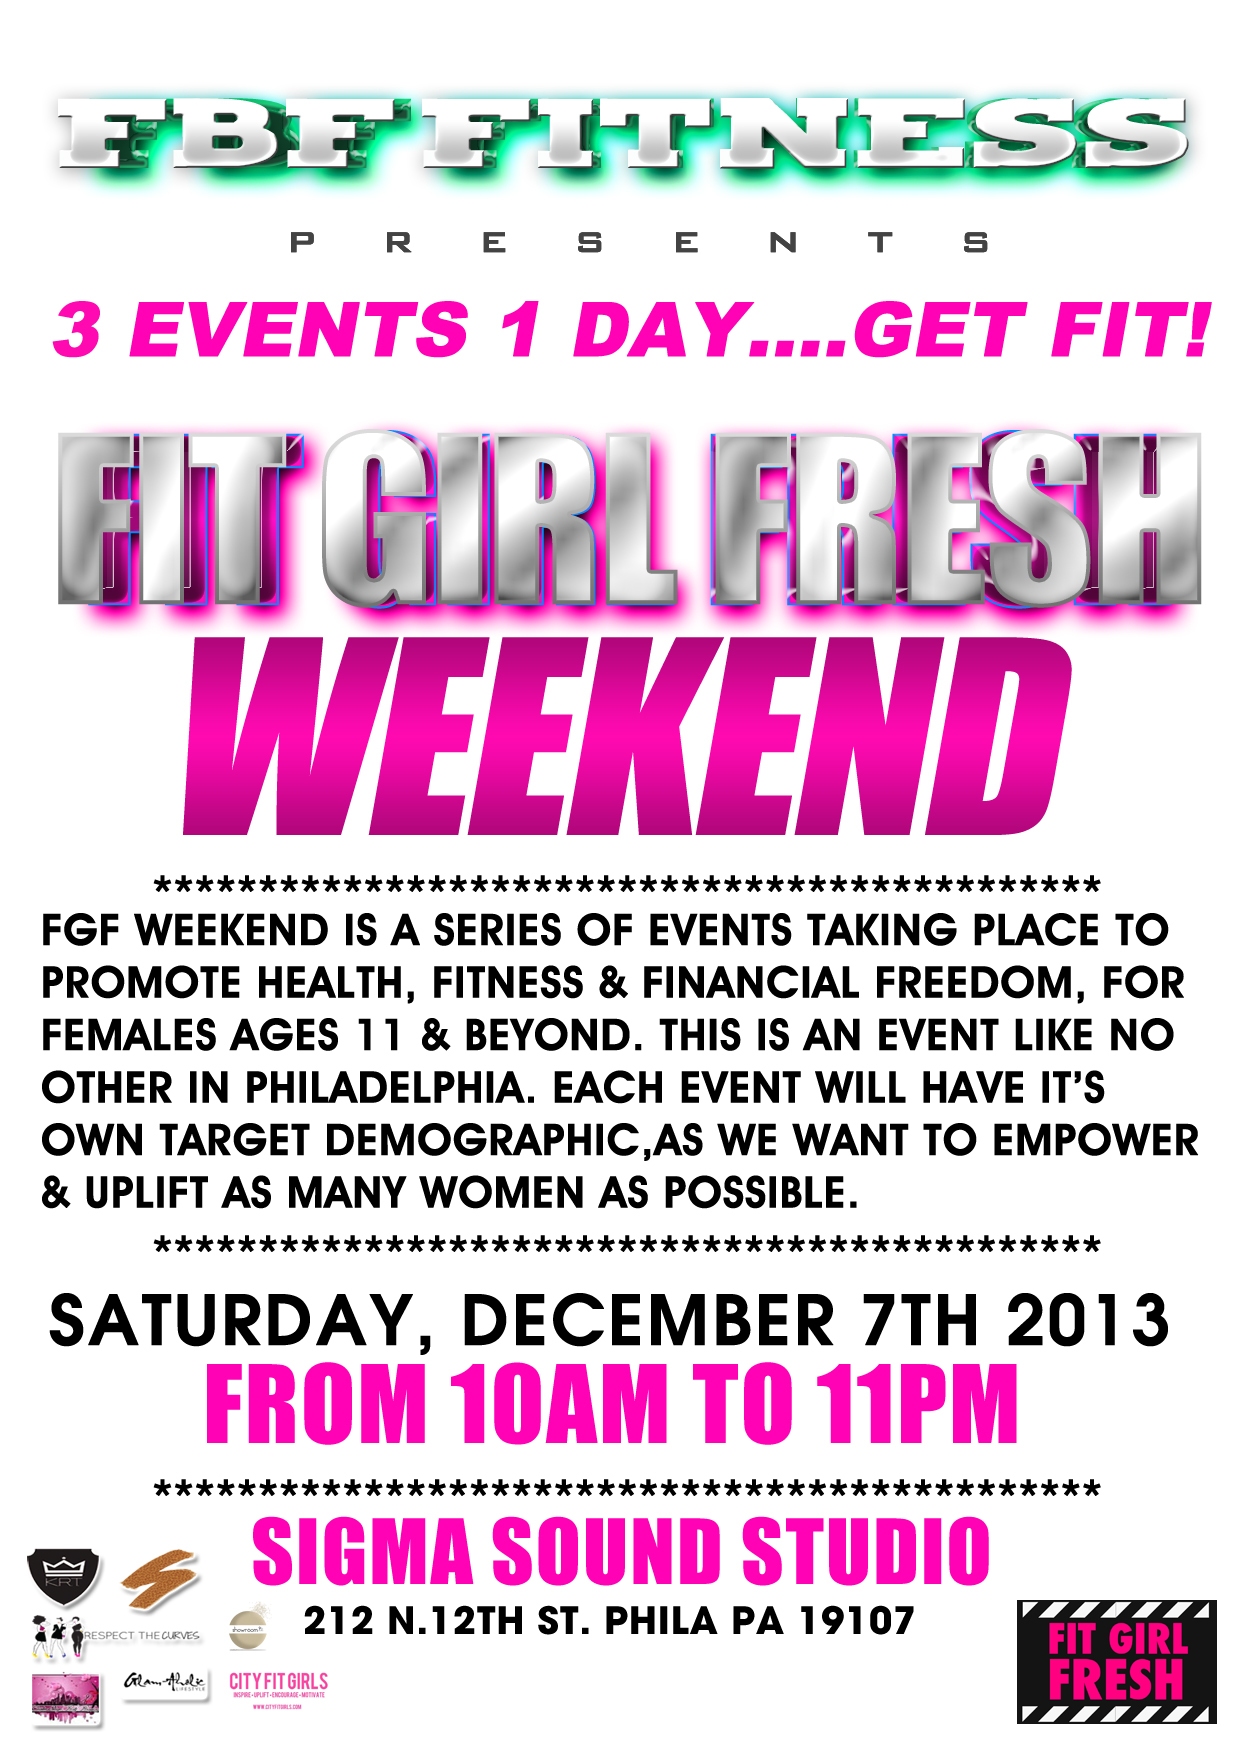 back FIT girl FRESH Weekend (Philly, Pa) (December 7, 2013)  